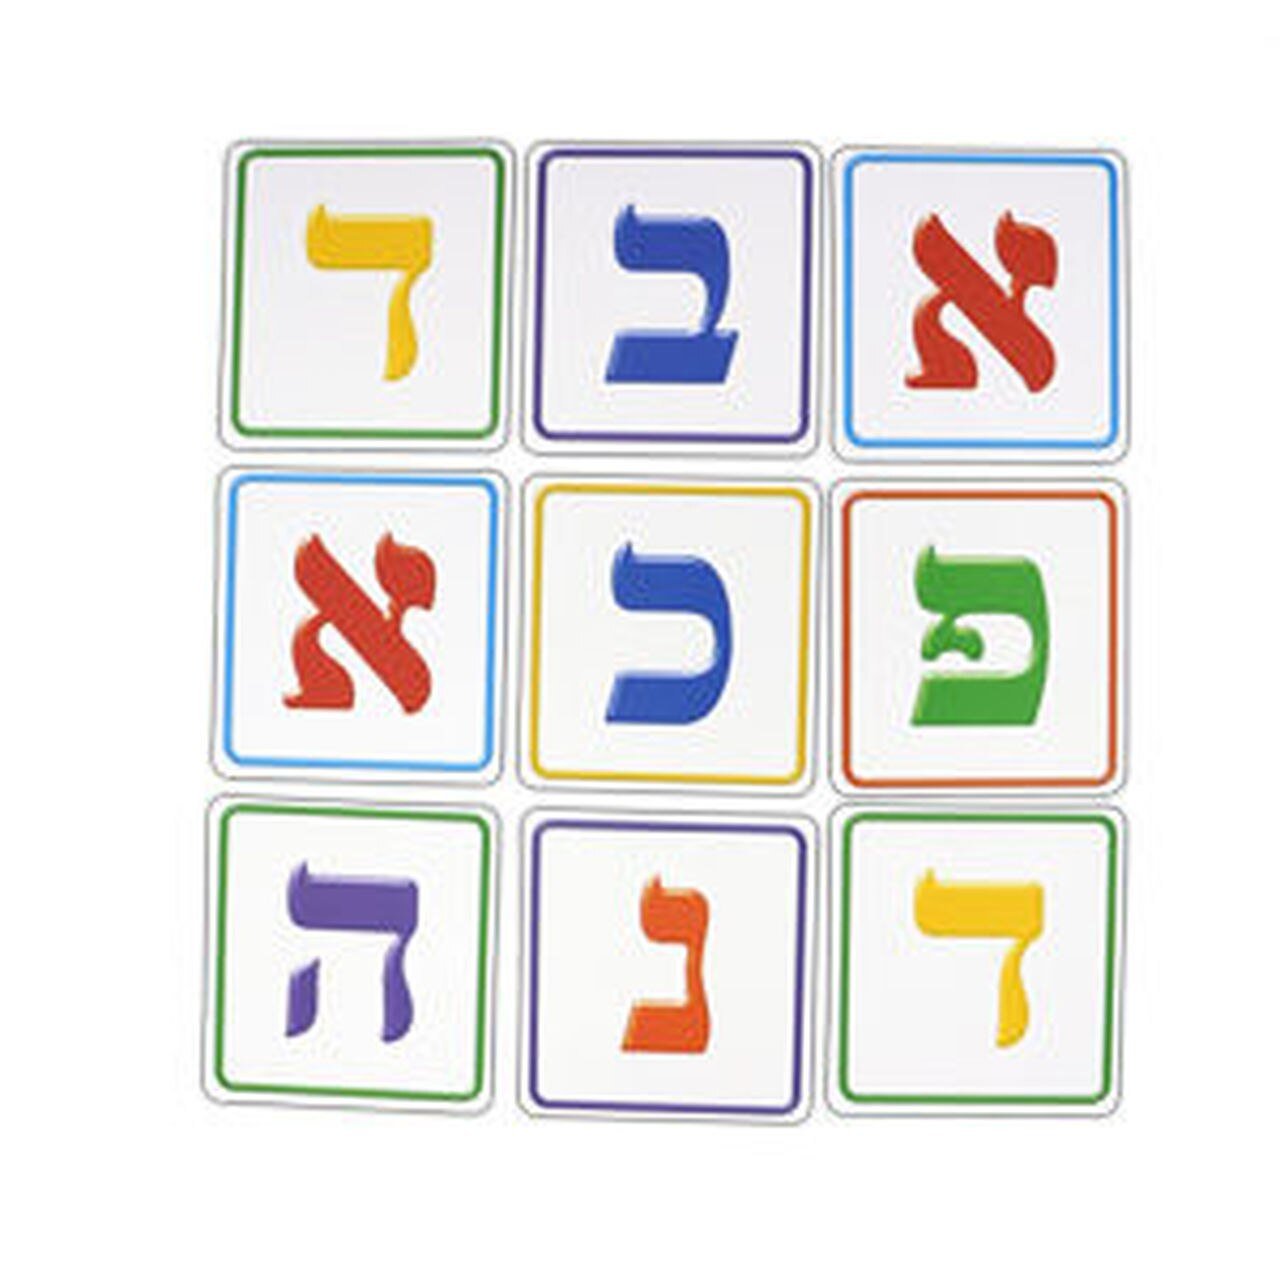 Aleph Bet Hebrew Memory Match Cards Game - 64 Extra-Thick Durable Cards